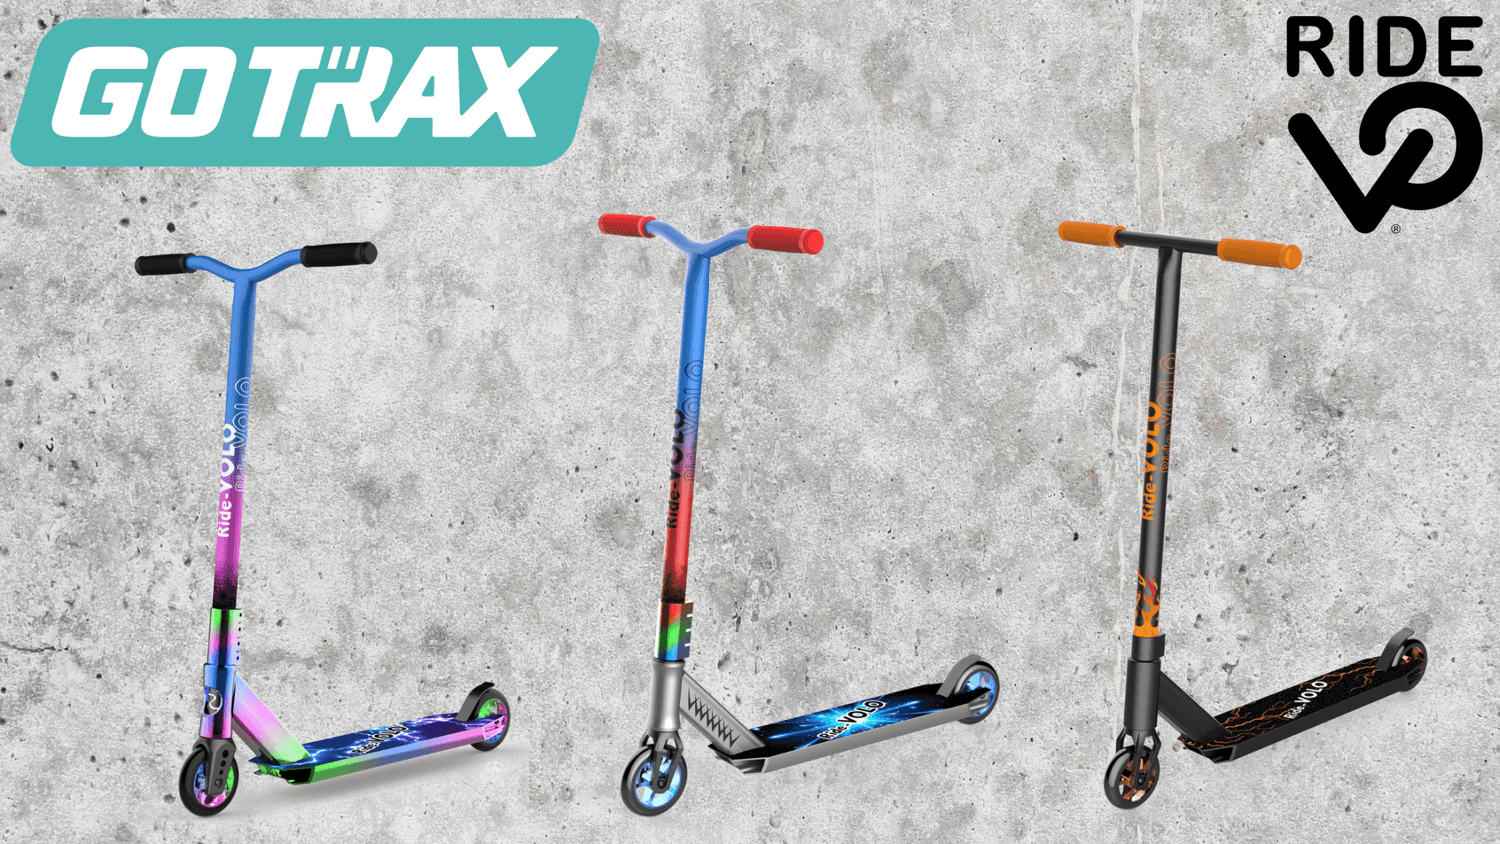 GOTRAX New Collection of Stunt Scooters - GOTRAX